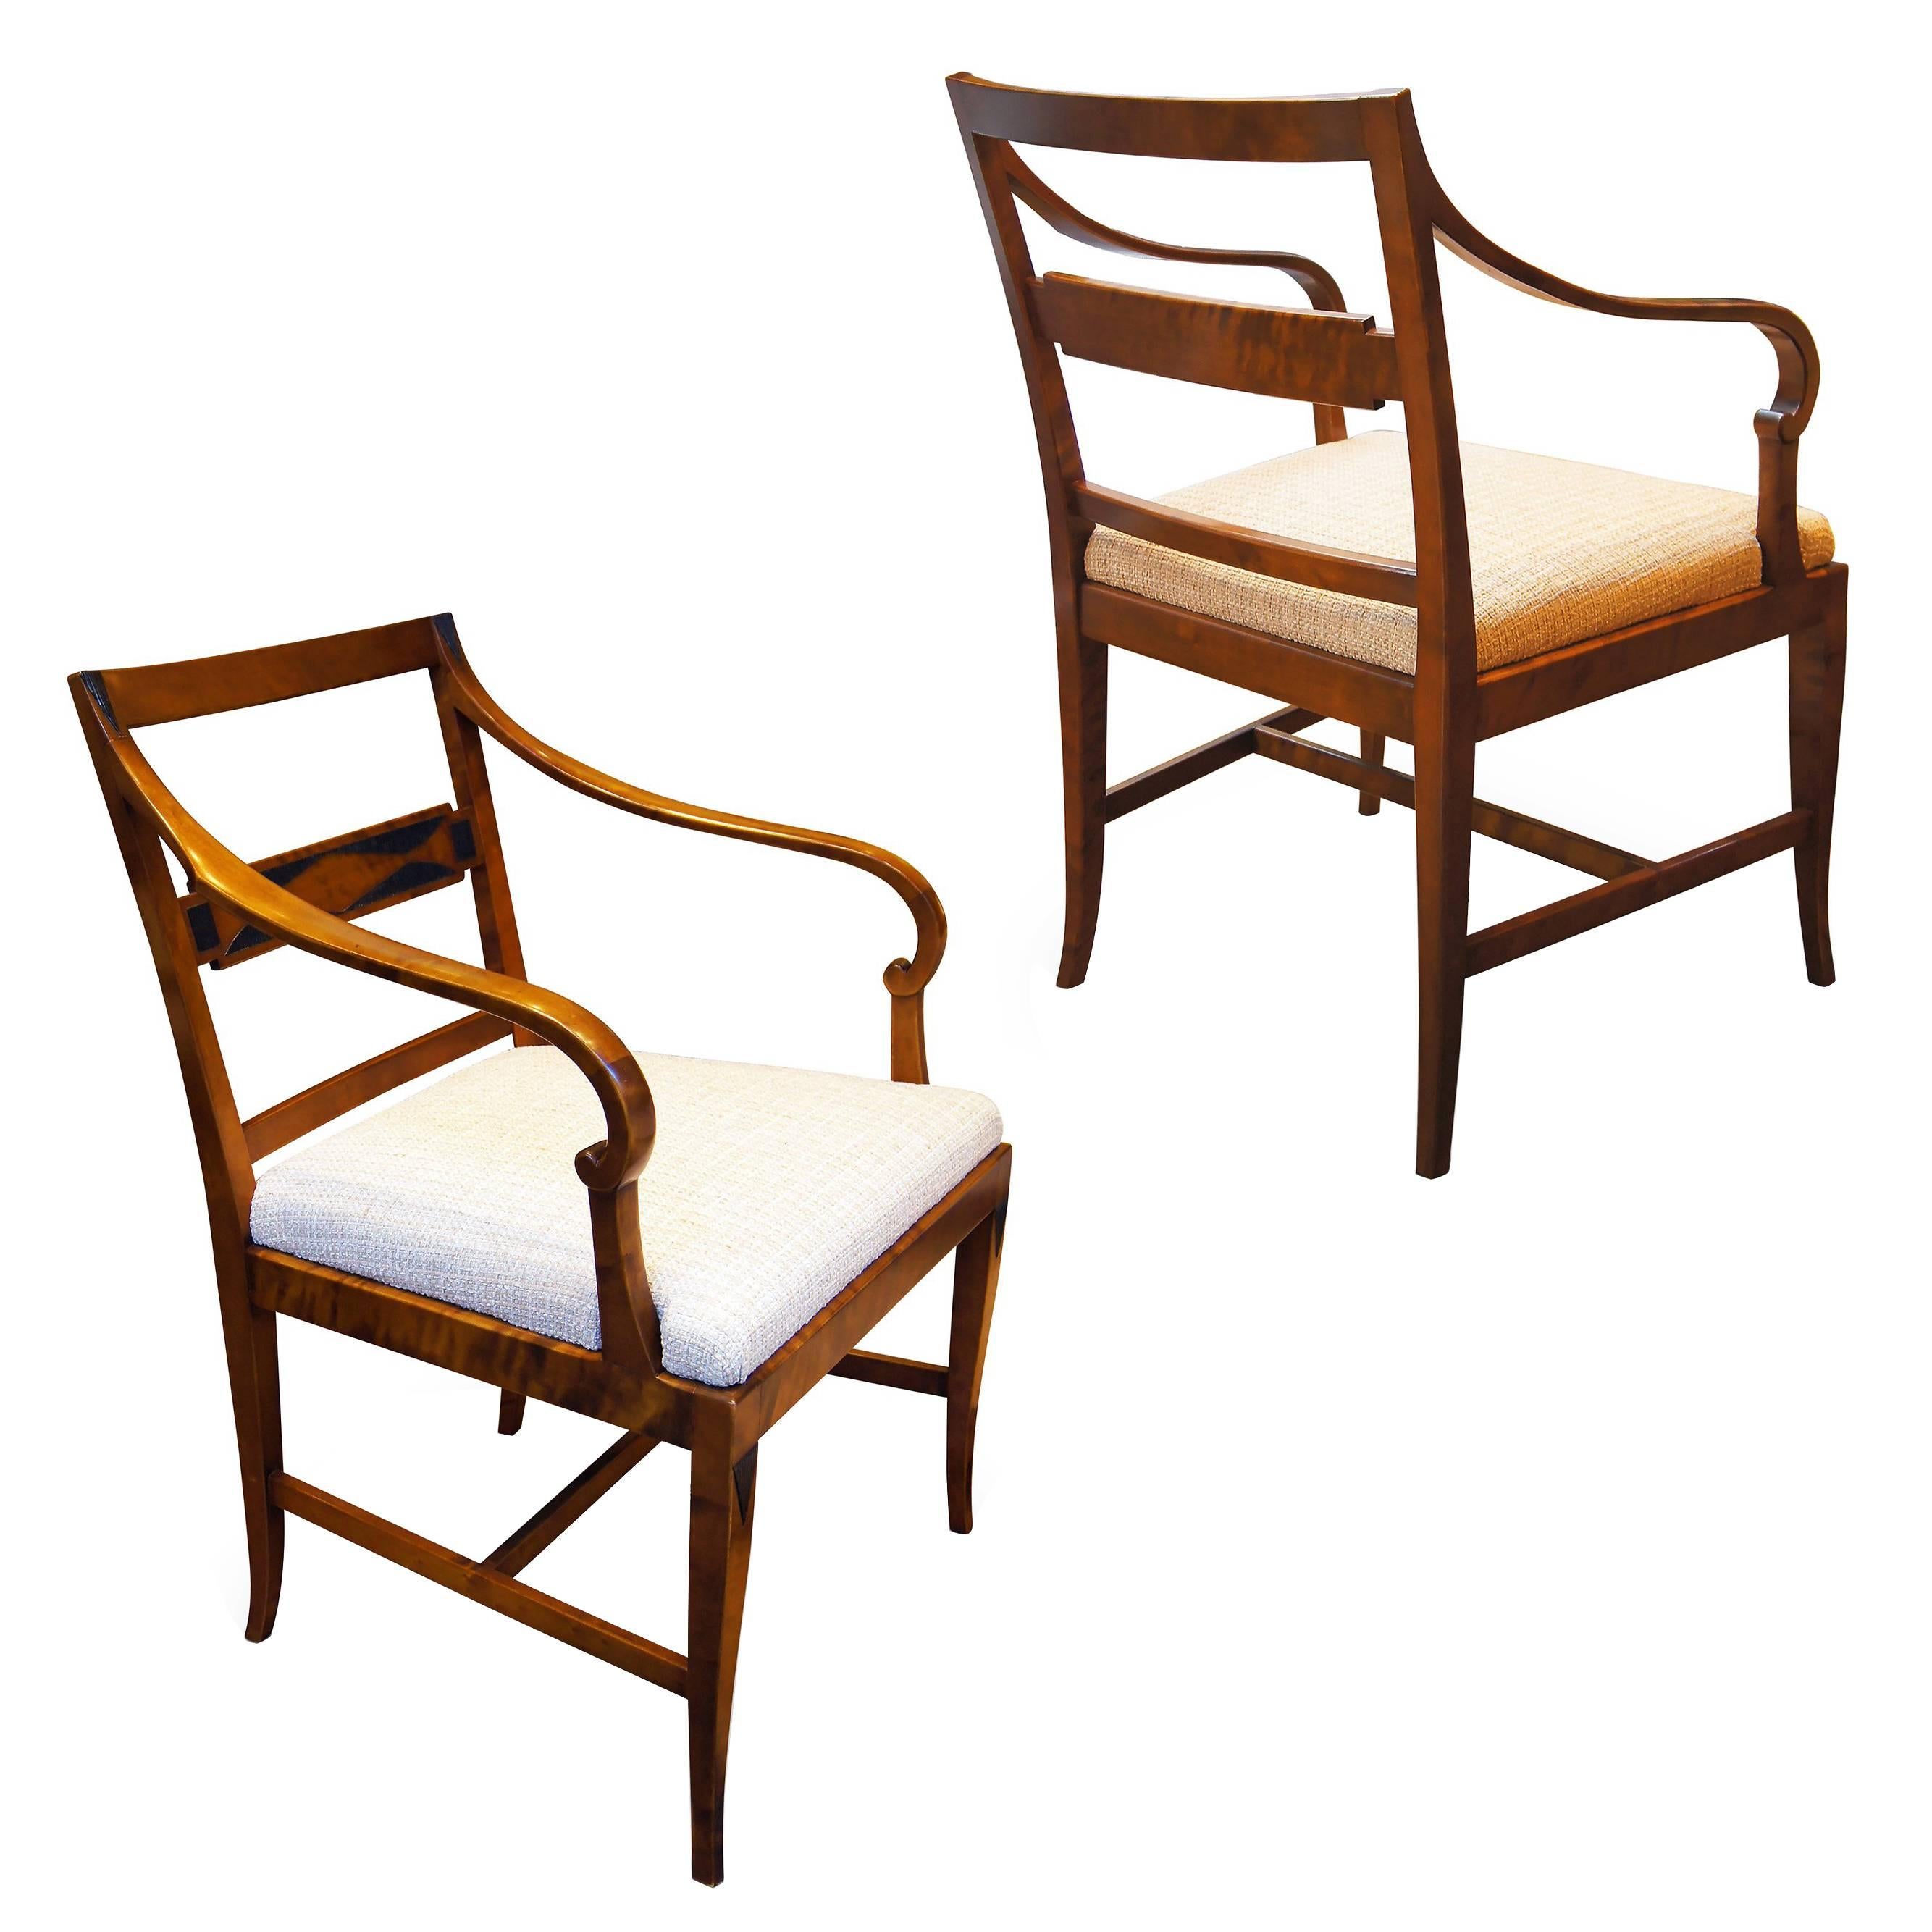 Pair of Art Deco Modern Classicism Armchairs in Birch by Carl Malmsten For Sale